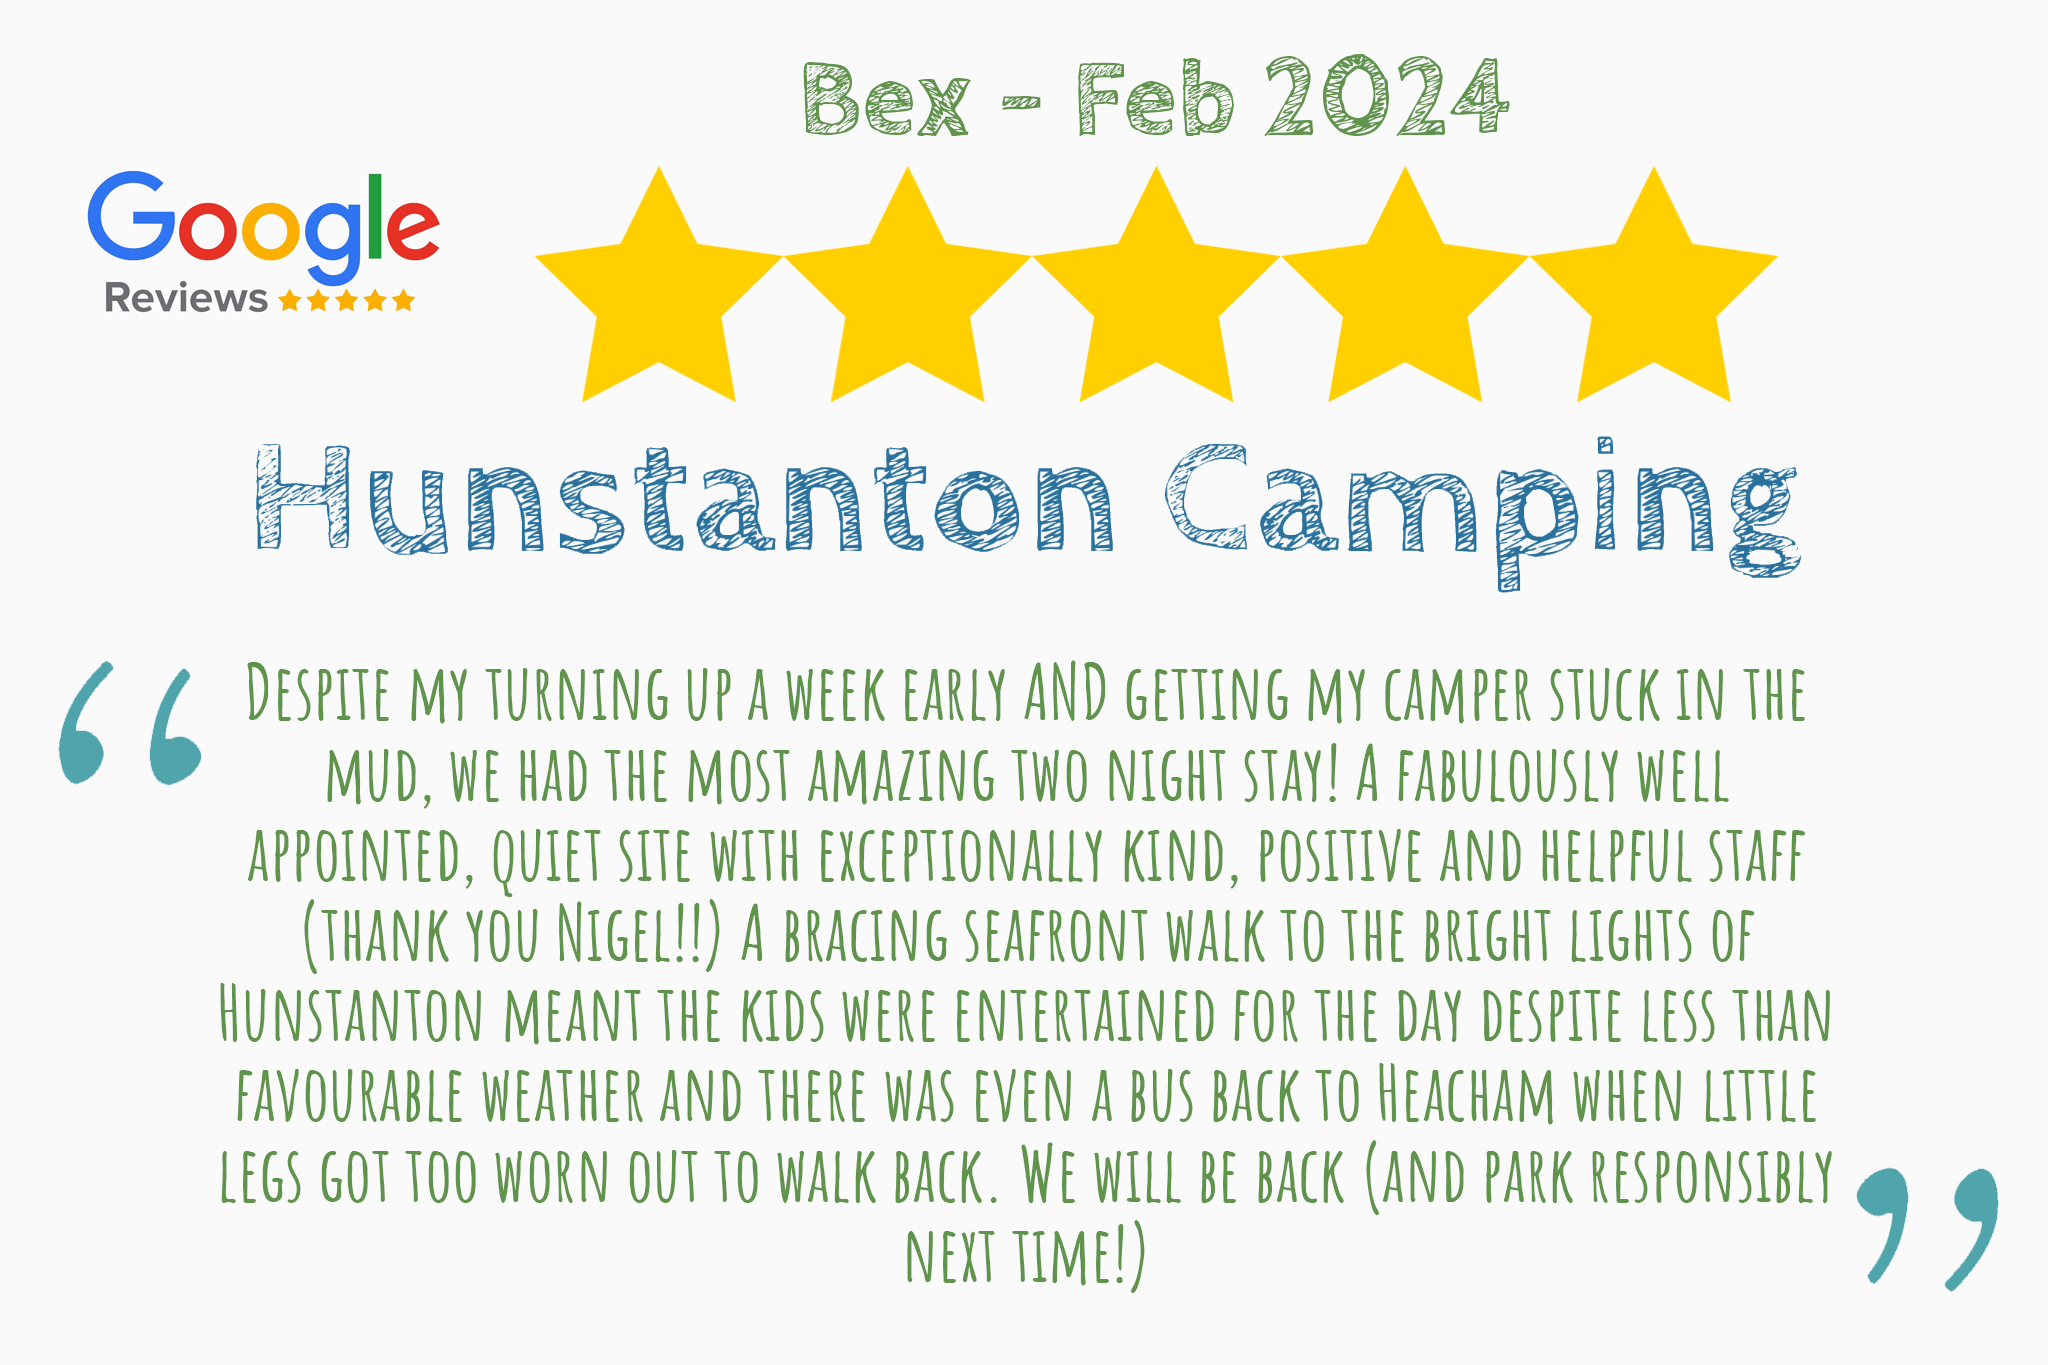 5 star pitchup review from bex that says "Despite my turning up a week early AND getting my camper stuck in the mud, we had the most amazing two night stay! A fabulously well appointed, quiet site with exceptionally kind, positive and helpful staff (thank you Nigel!!) A bracing seafront walk to the bright lights of Hunstanton meant the kids were entertained for the day despite less than favourable weather and there was even a bus back to Heacham when little legs got too worn out to walk back. We will be back (and park responsibly next time!)"